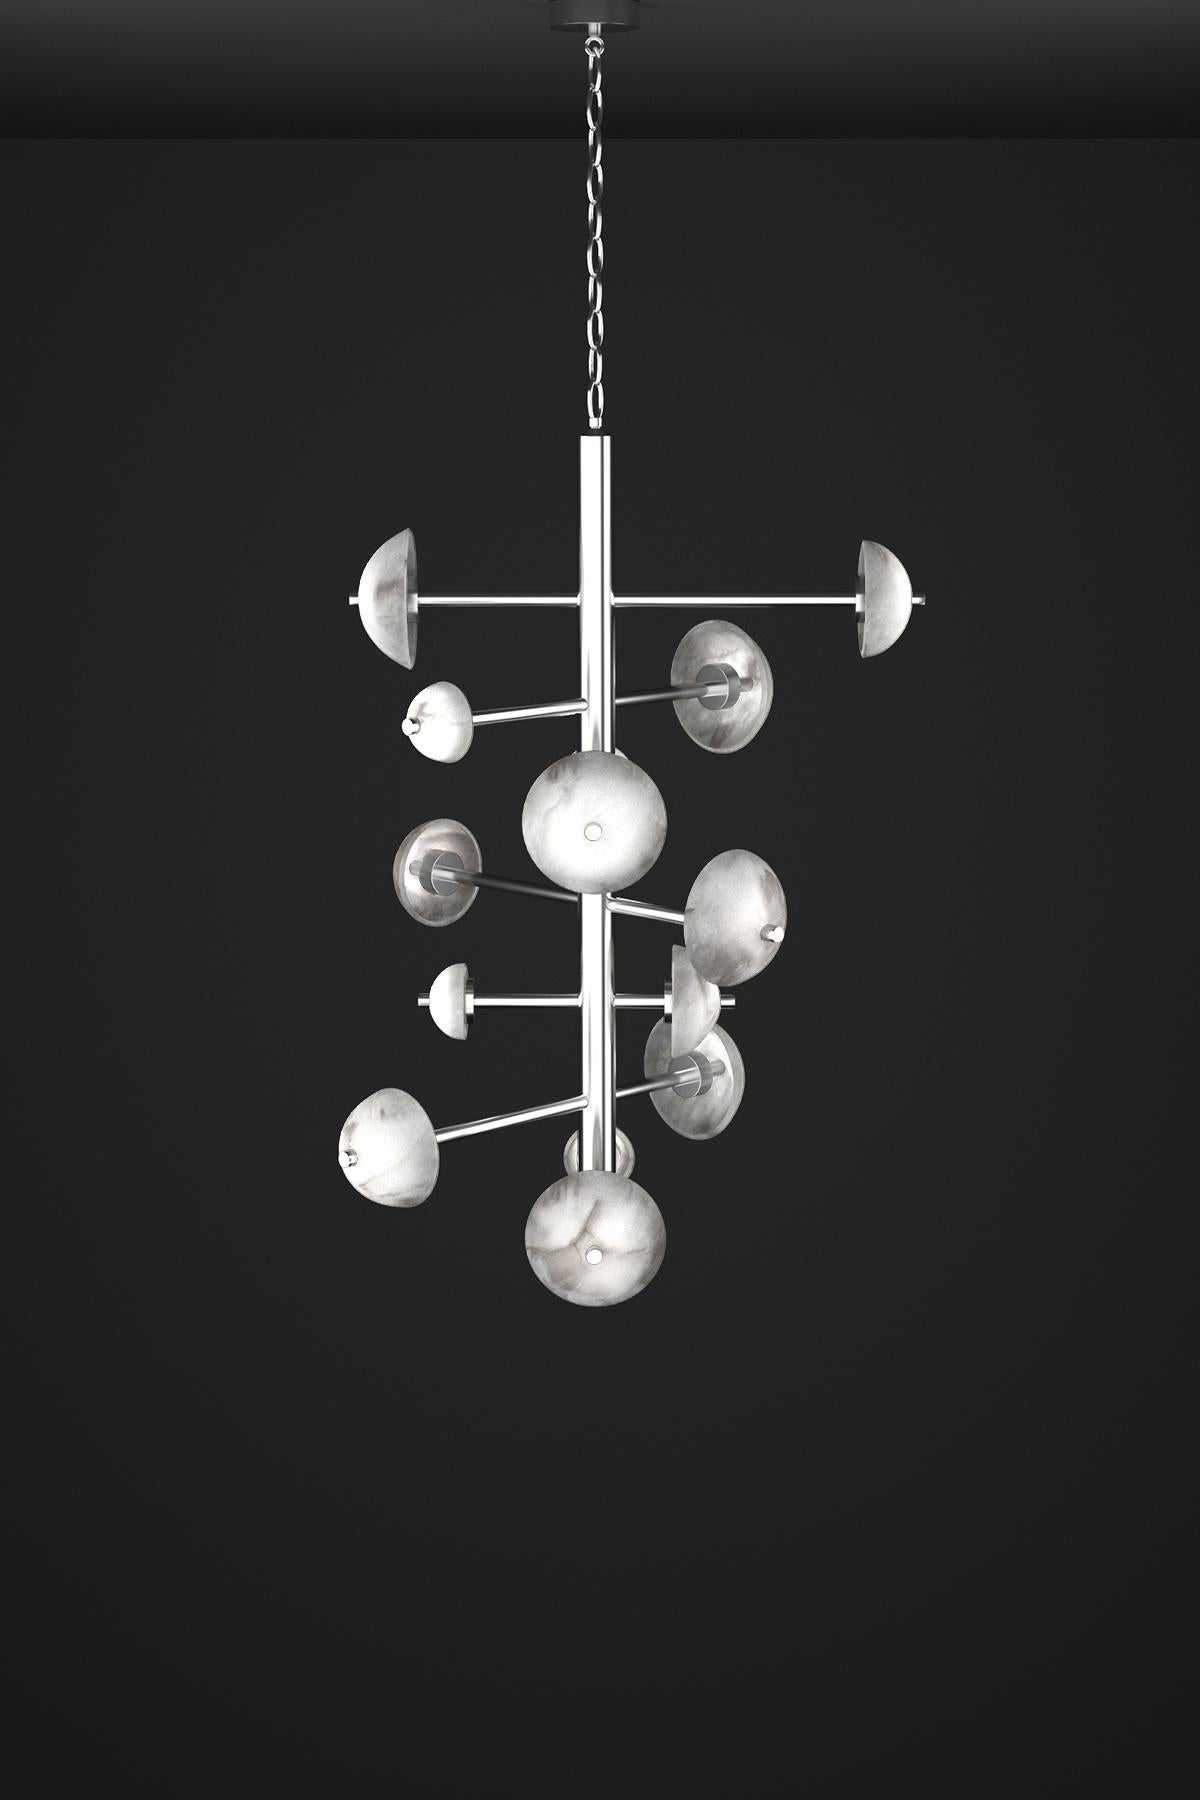 Apollo Shiny Silver Metal Chandelier by Alabastro Italiano
Dimensions: D 70,5 x W 55 x H 111 cm.
Materials: White alabaster and metal.

Available in different finishes: Shiny Silver, Bronze, Brushed Brass, Ruggine of Florence, Brushed Burnished,